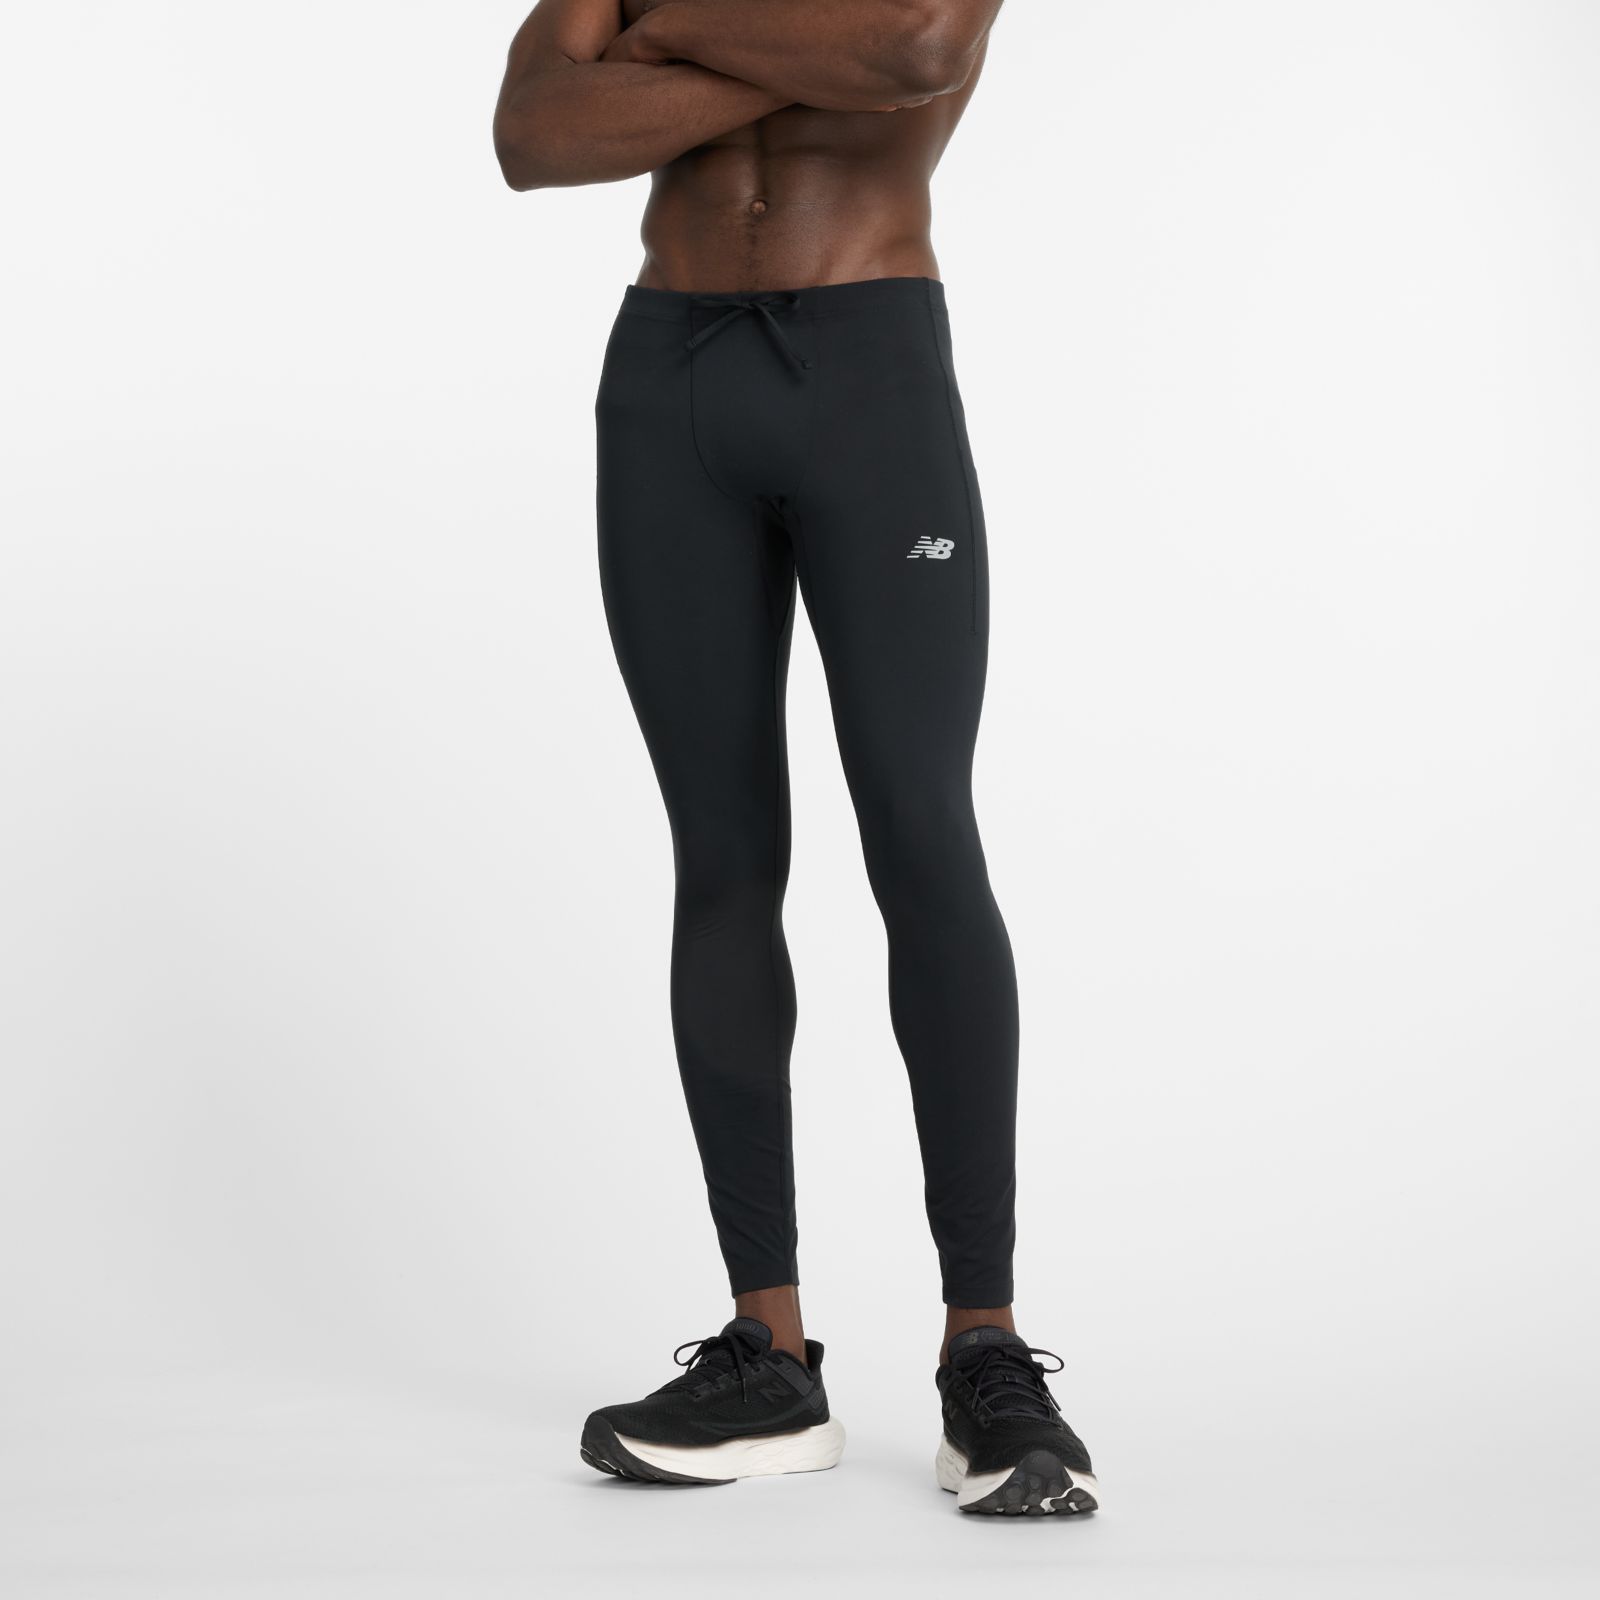 NB New Balance Women's Tight with Pockets High Rise workout leggings 🔥  G5242